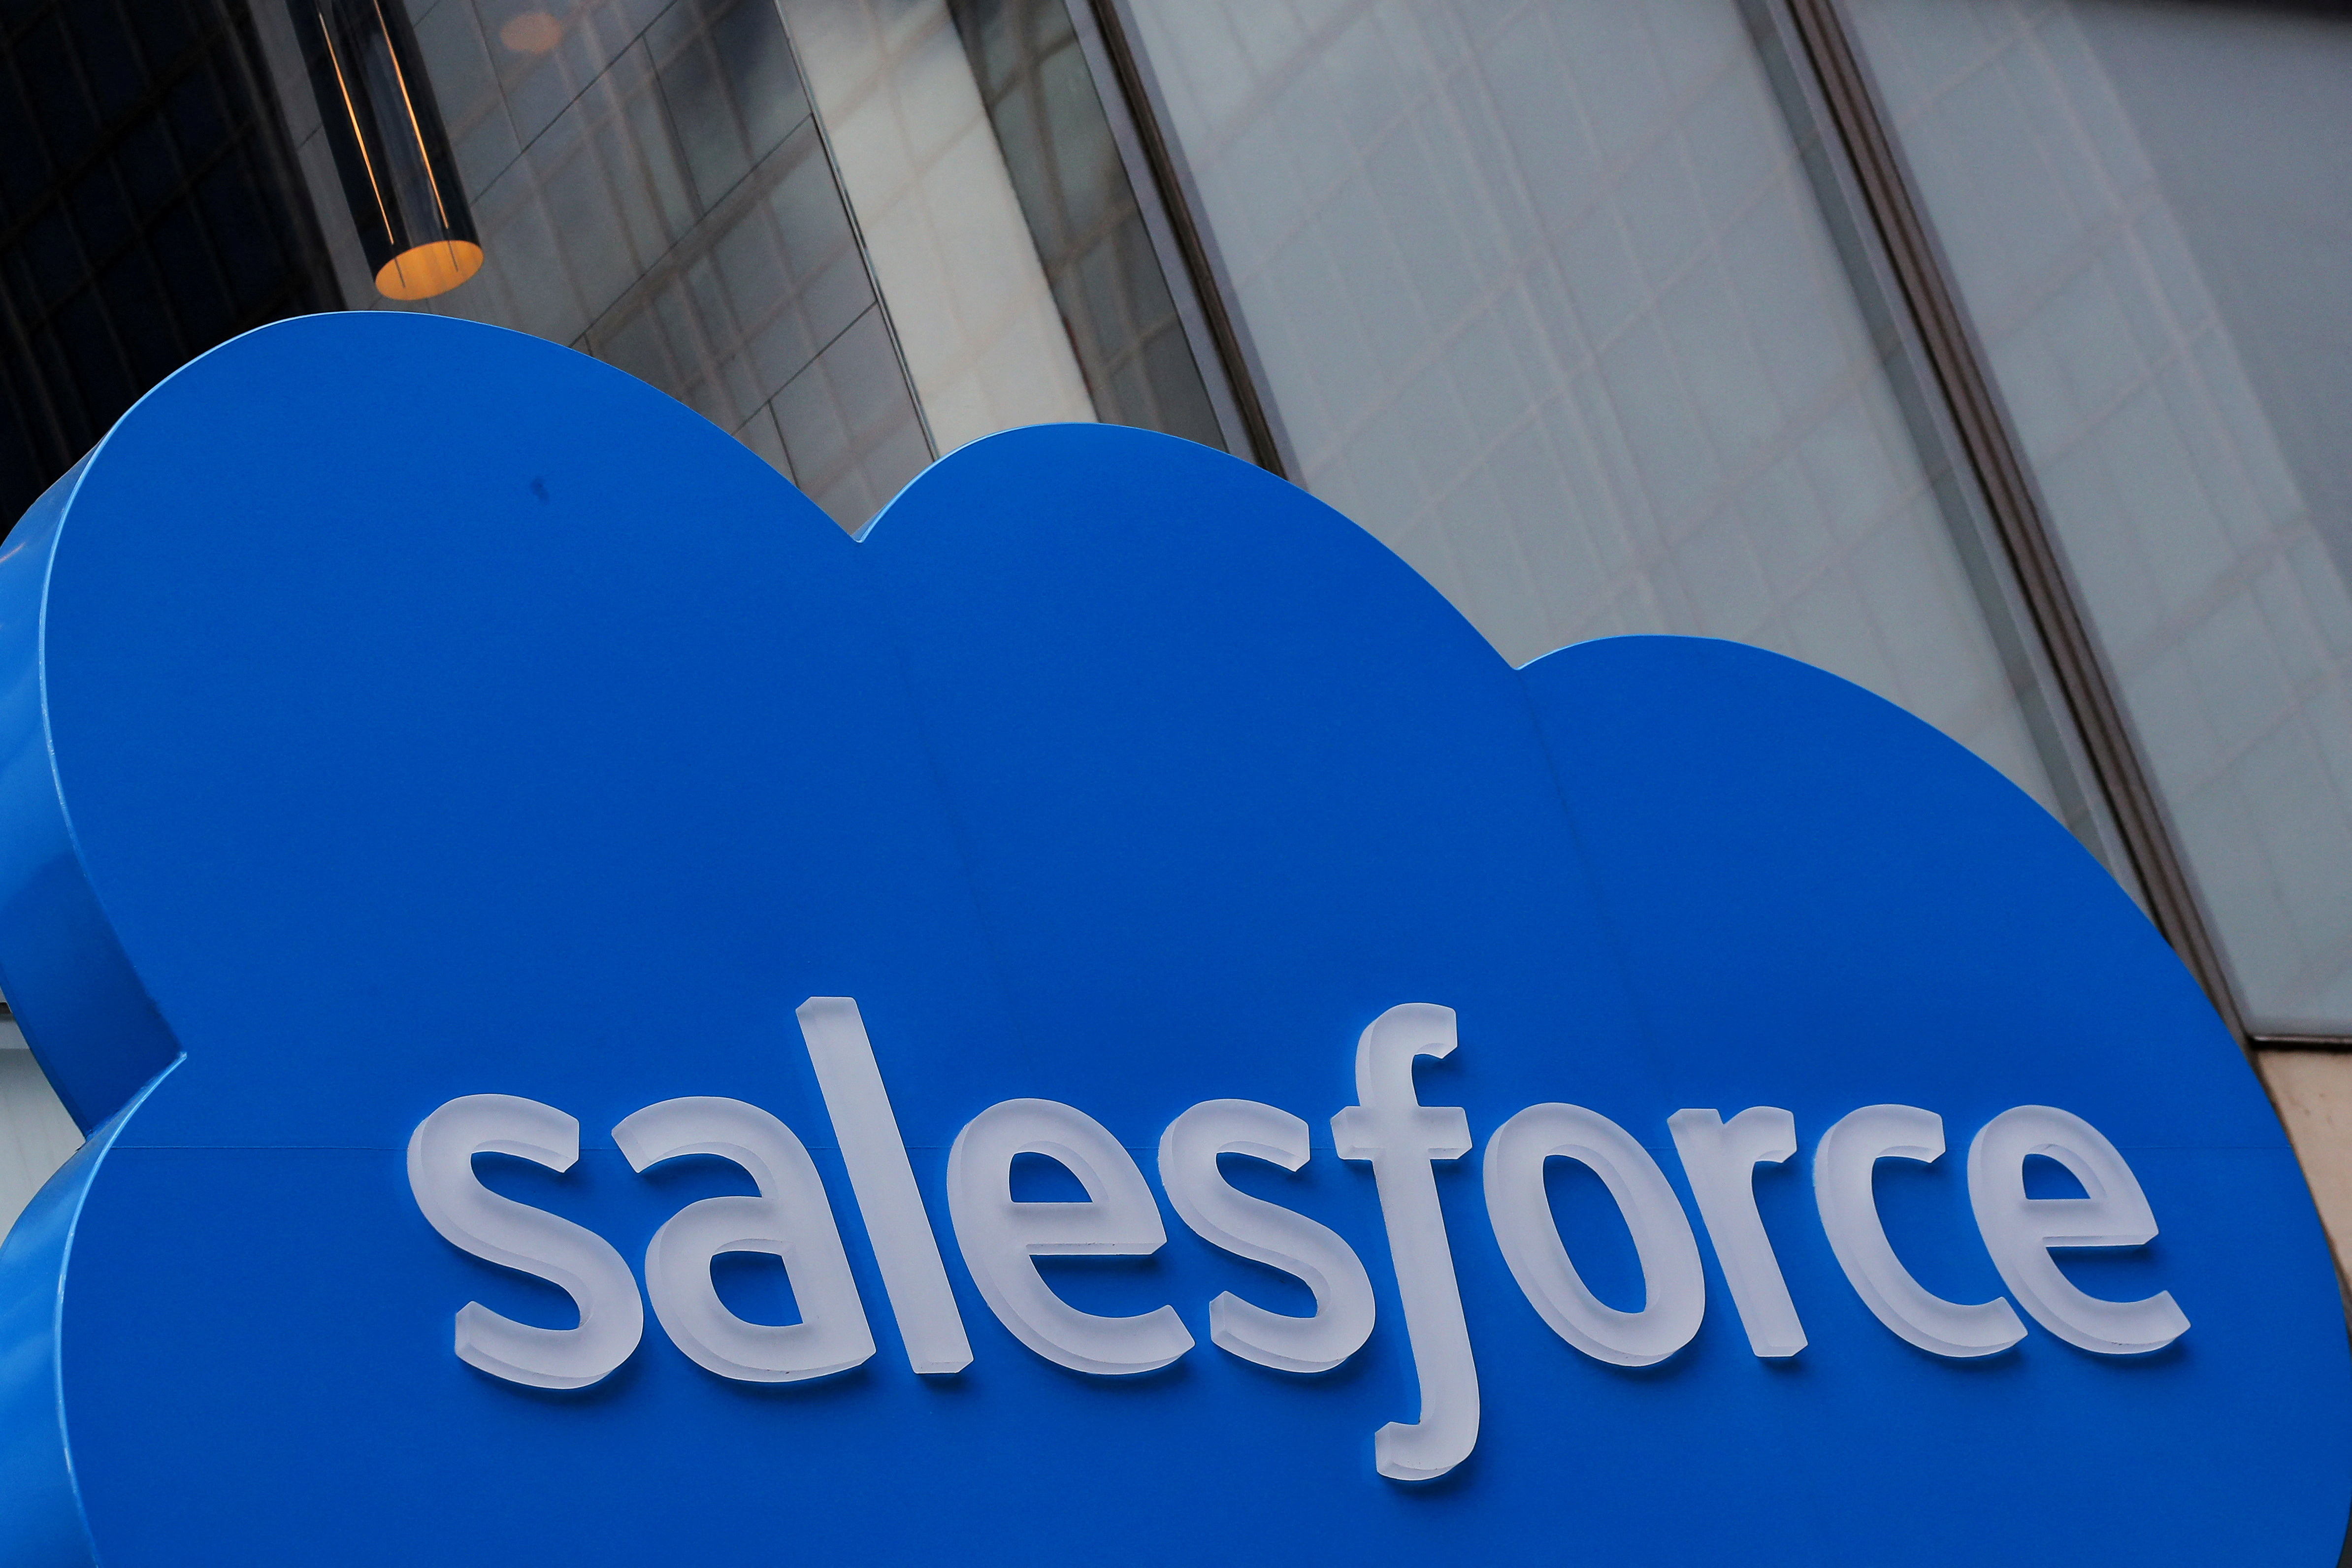 The company logo for Salesforce.com is displayed on the Salesforce Tower in New York